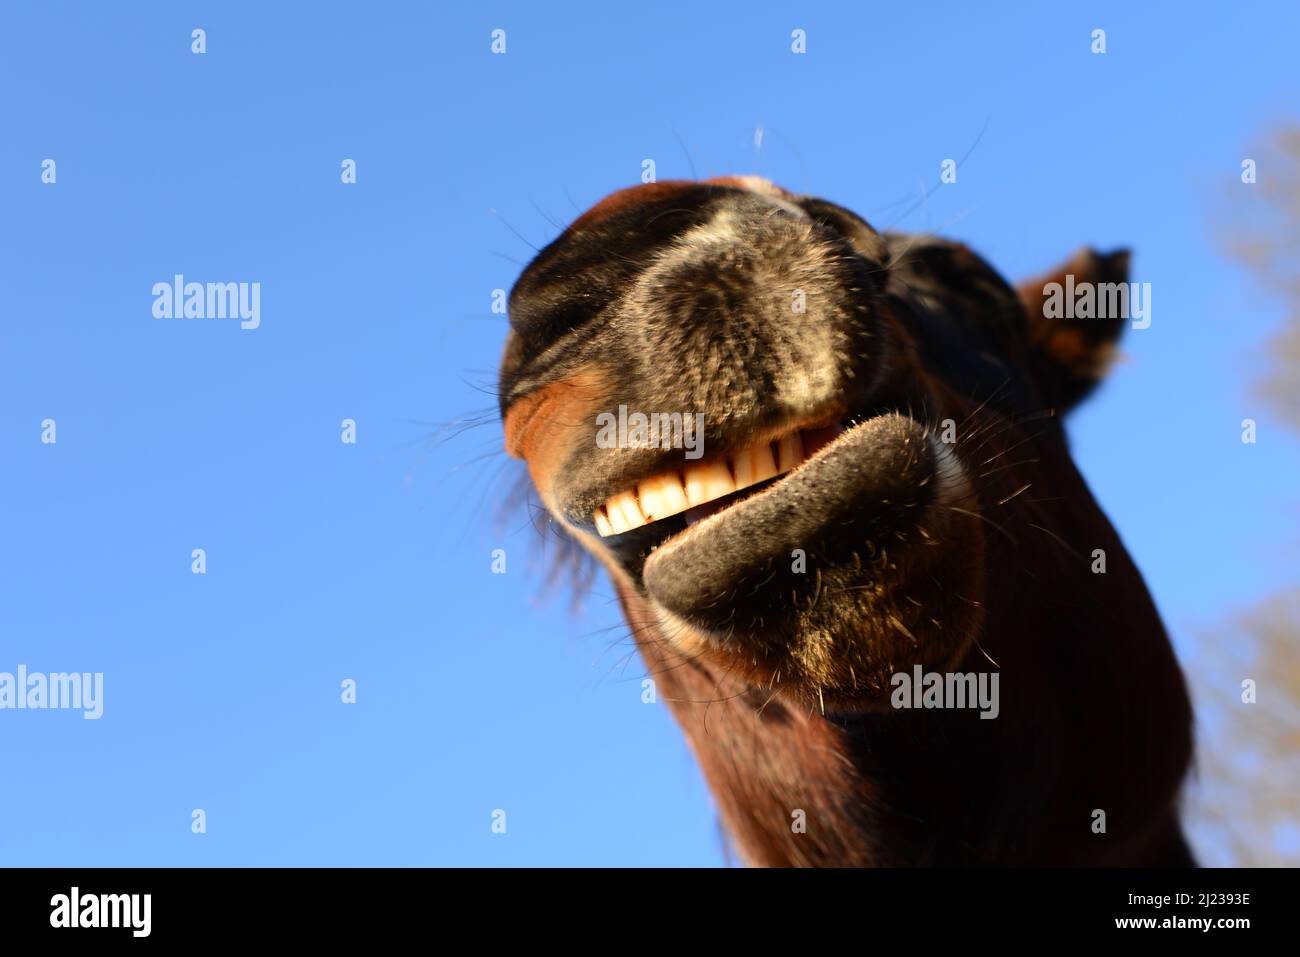 Open mouth of a brown horse from below against ablue sky as a close up Stock Photo